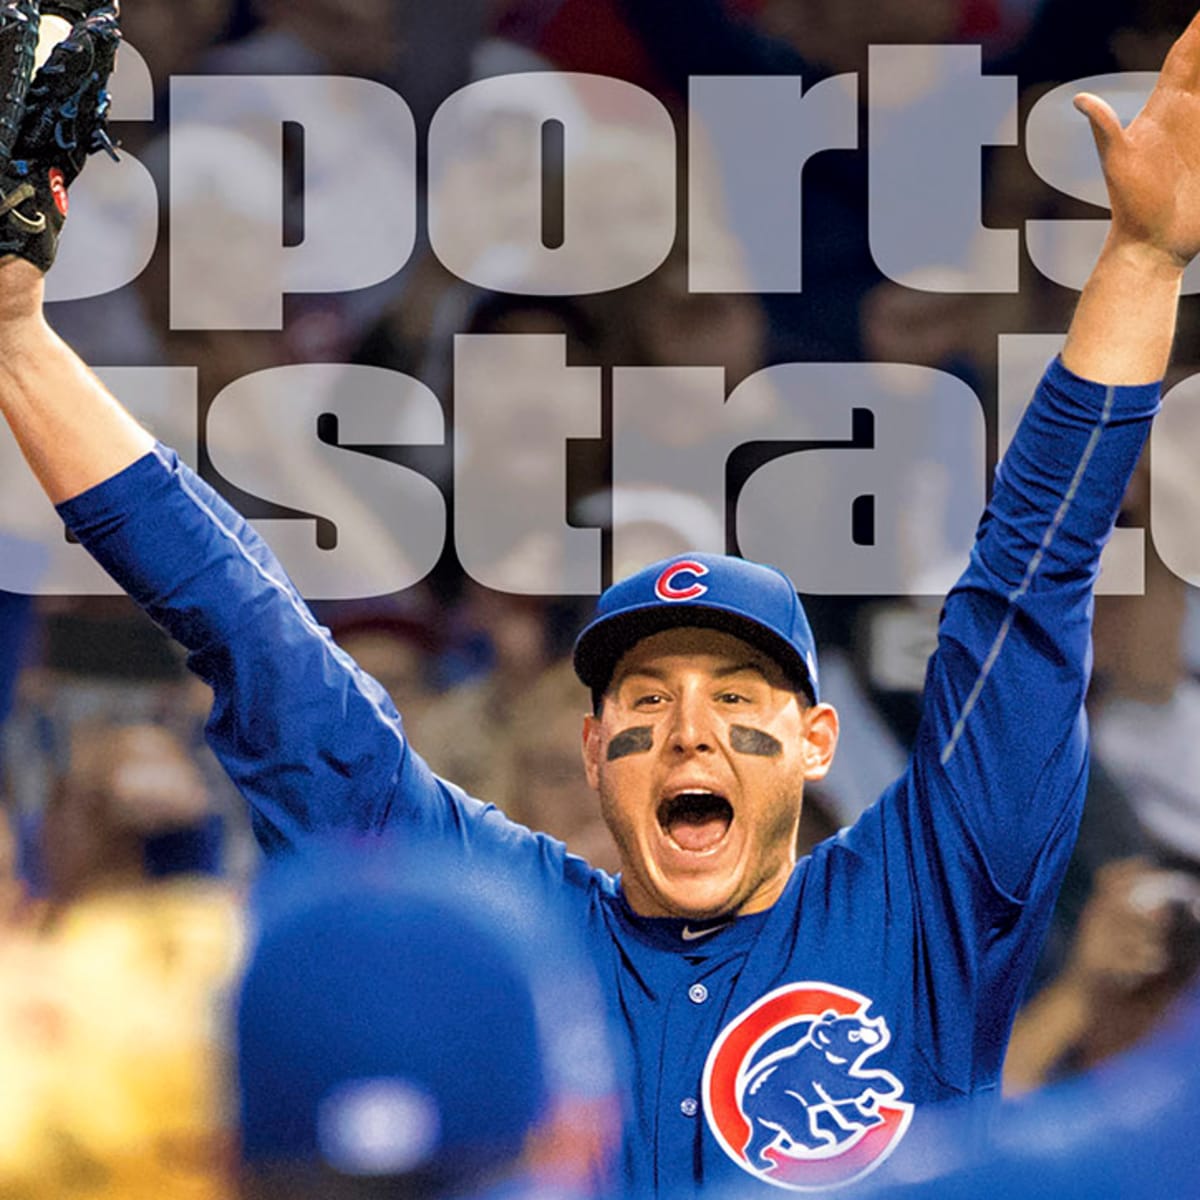 Sports Illustrated Chicago Cubs 2016 World Series Champions Commemorative  Issue - Team Celebration Cover: Cubs Win!